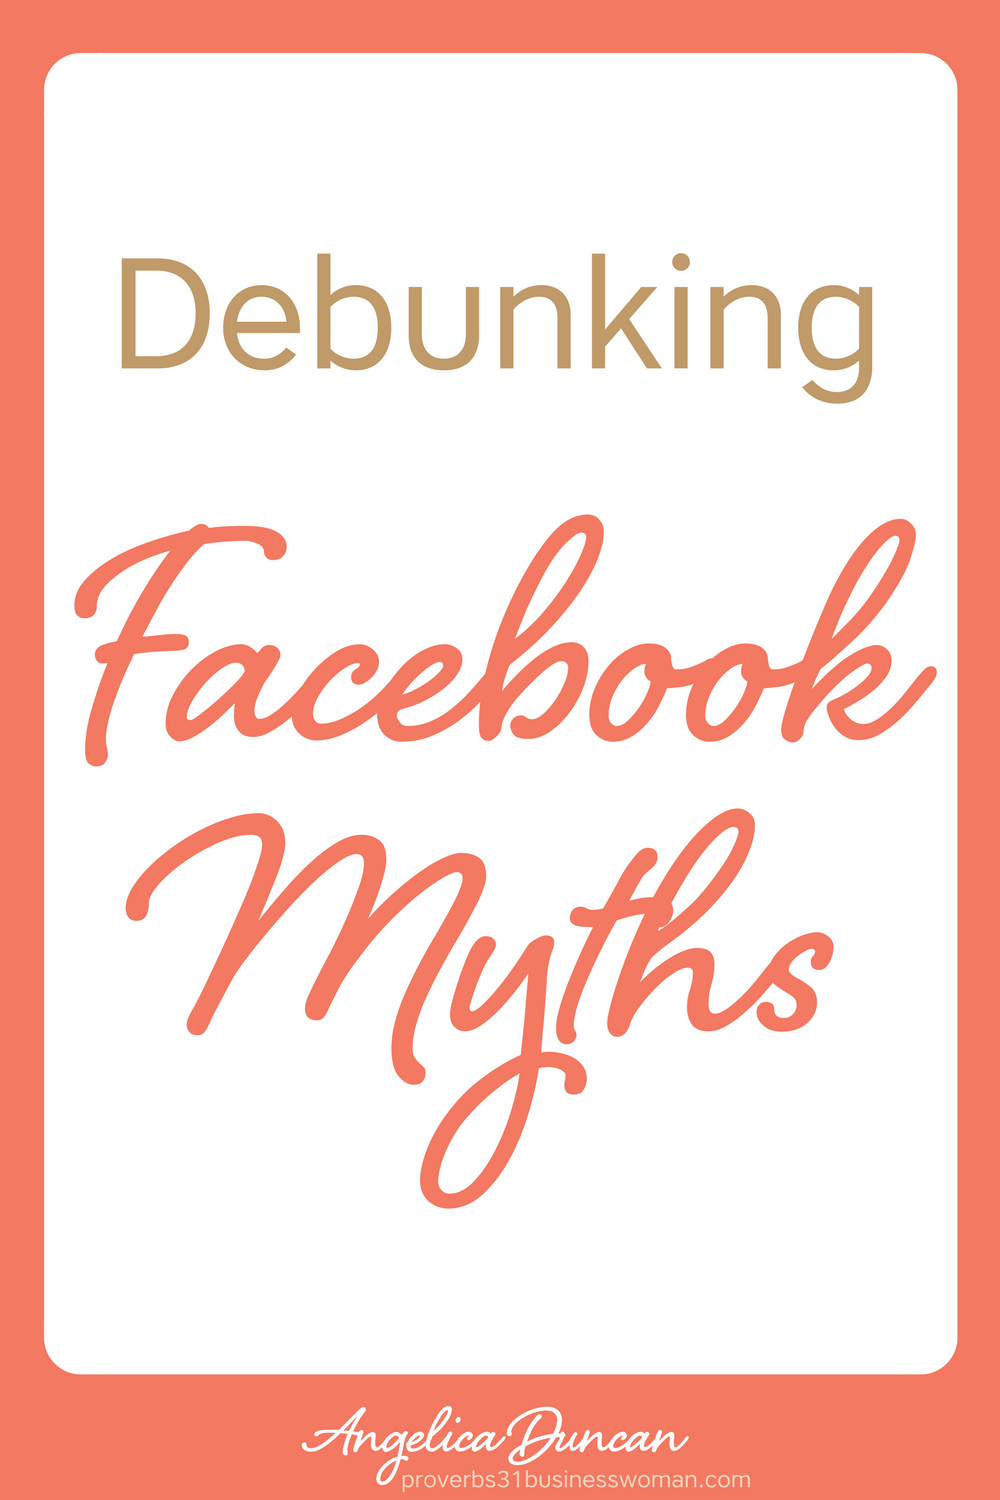 You can't believe everything you hear about Facebook. There are TONS of them, mostly of rooted in the wrong belief system. Let's debunk those myths today! #facebook #mompreneur #onlinebusiness #wahm #womeninbusiness #christianbusiness #christianwomeninbusiness #christianentrepreneurs #proverbs31 #proverbs31woman #proverbs31businesswoman #proverbs31enrepreneur #p31 #angelicaduncan #silkoversteel #sos